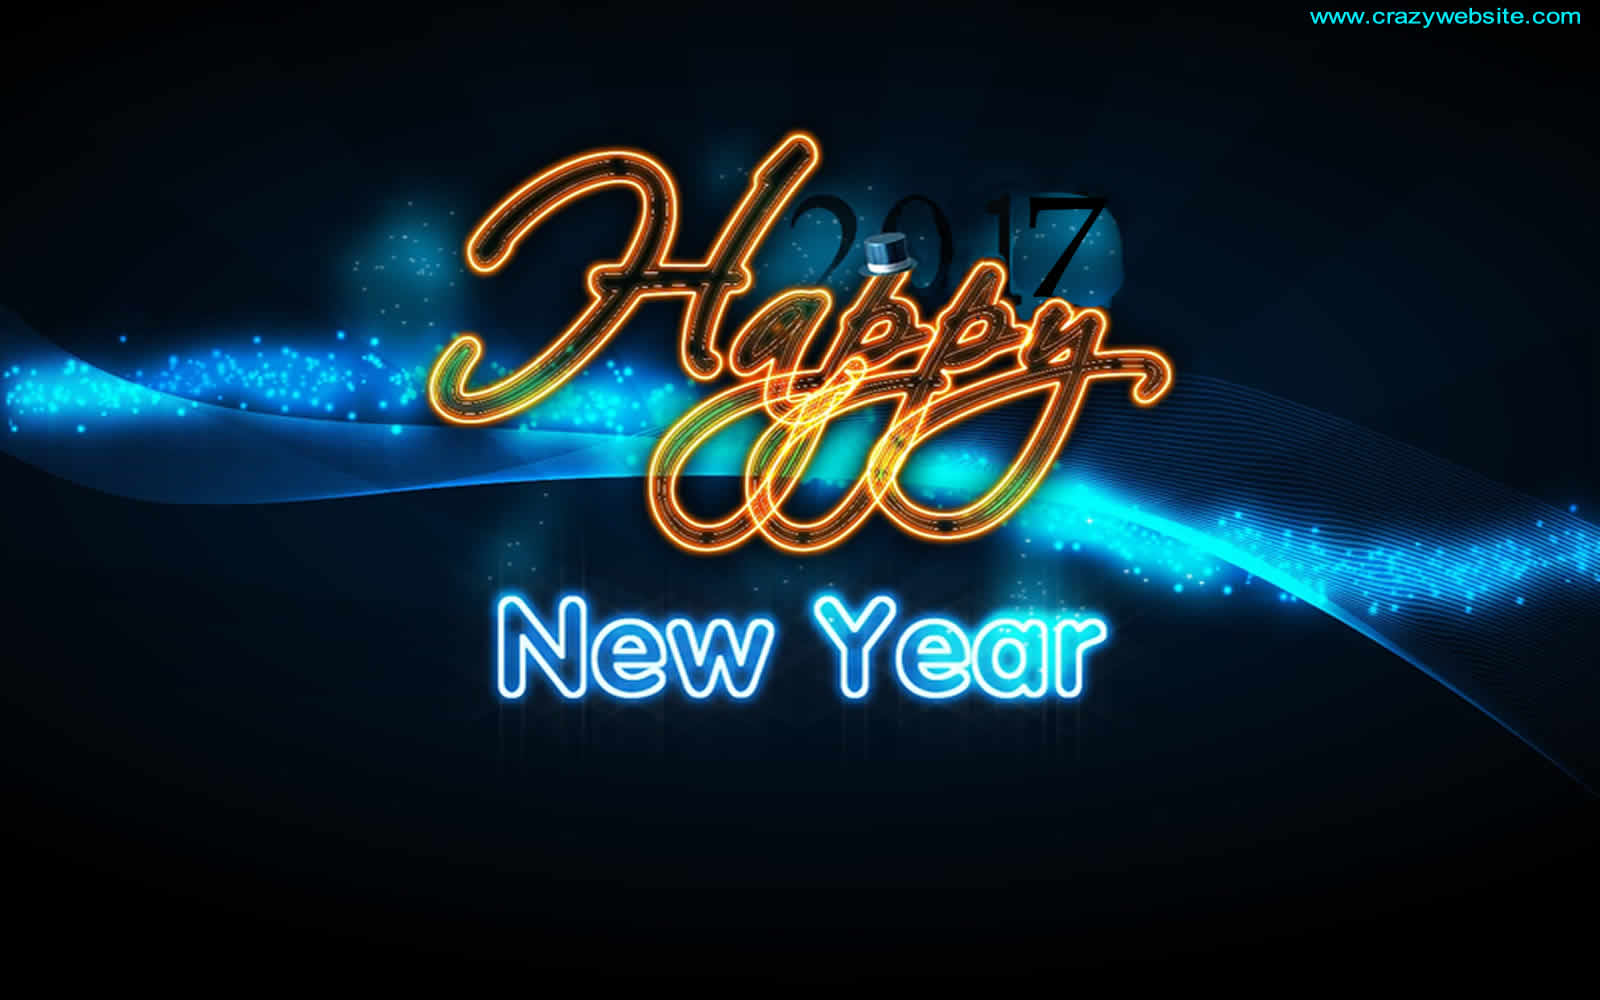 Wallpaper Backgrounds Free New Year 2016 / 2017 Graphic - Happy New Year 2012 Wishes - HD Wallpaper 